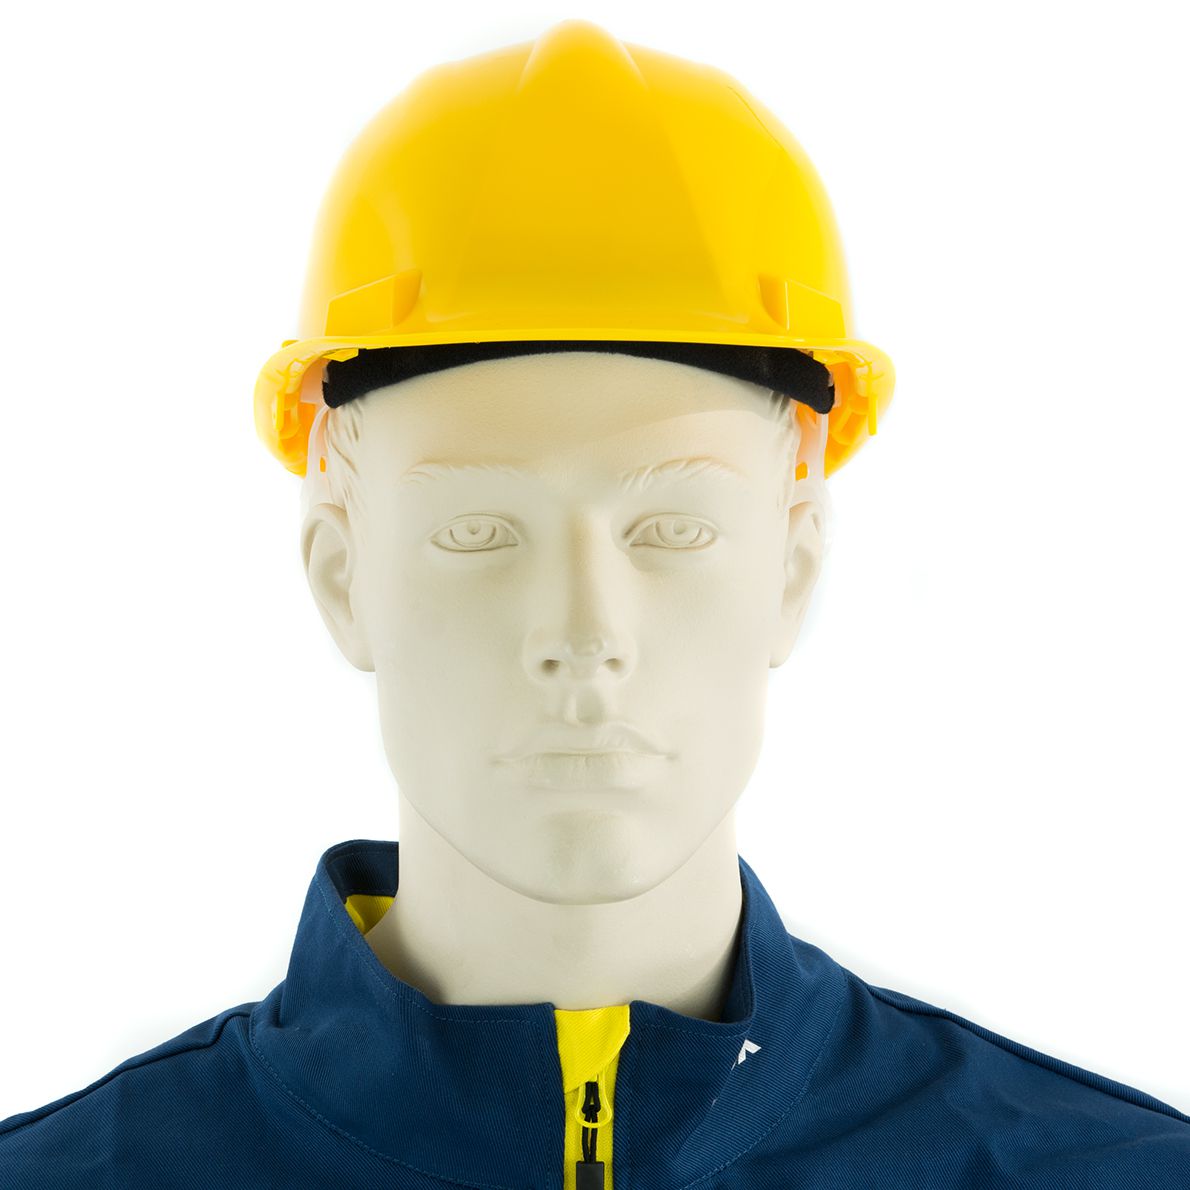 REIS UNIVER construction helmet - robust safety helmet for construction & industry - EN 397 - with 4-point suspension - yellow